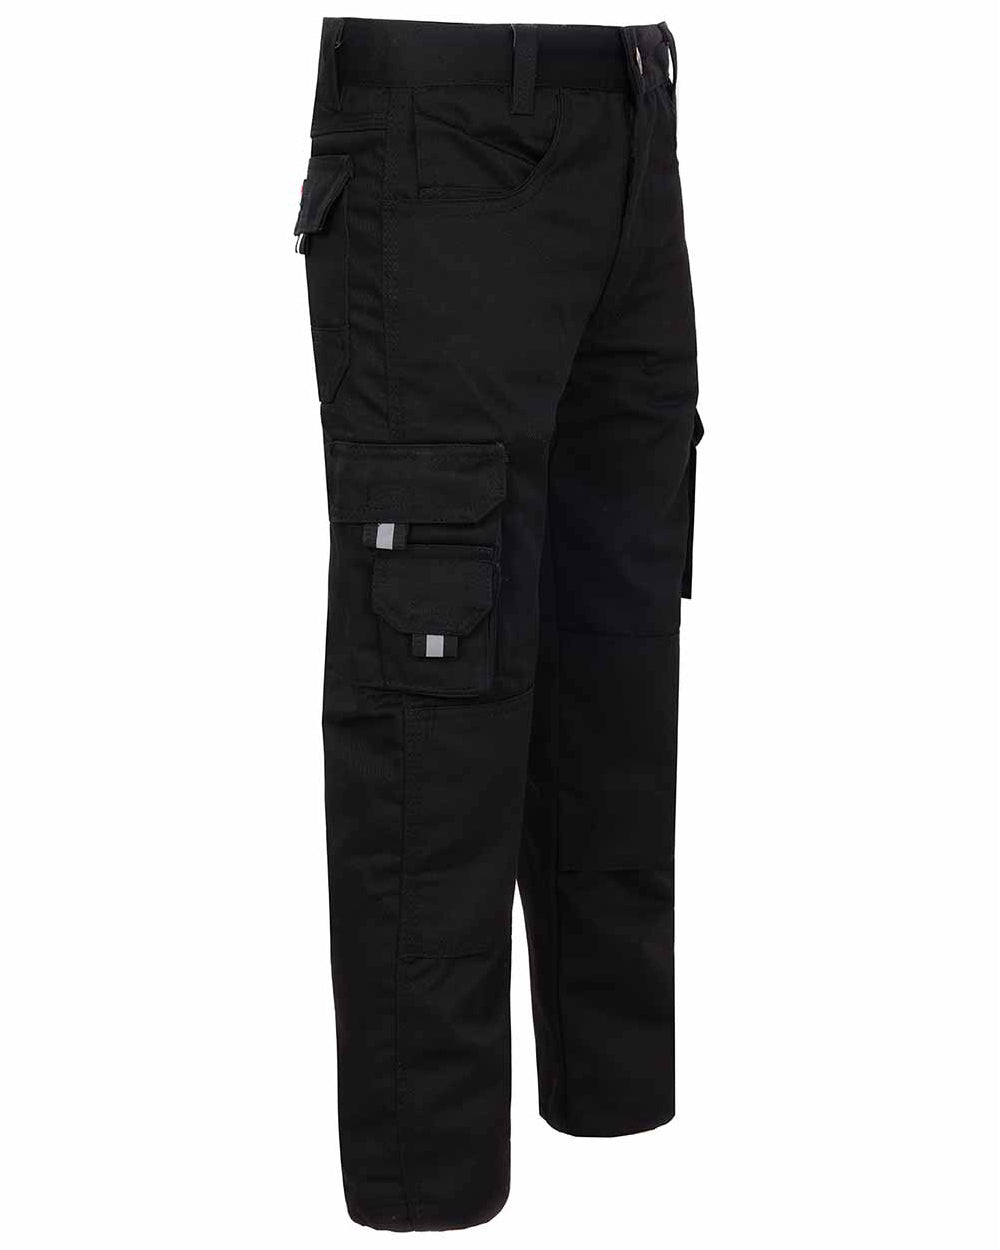 Black Coloured TuffStuff Junior Pro Work Trousers On A White Background 